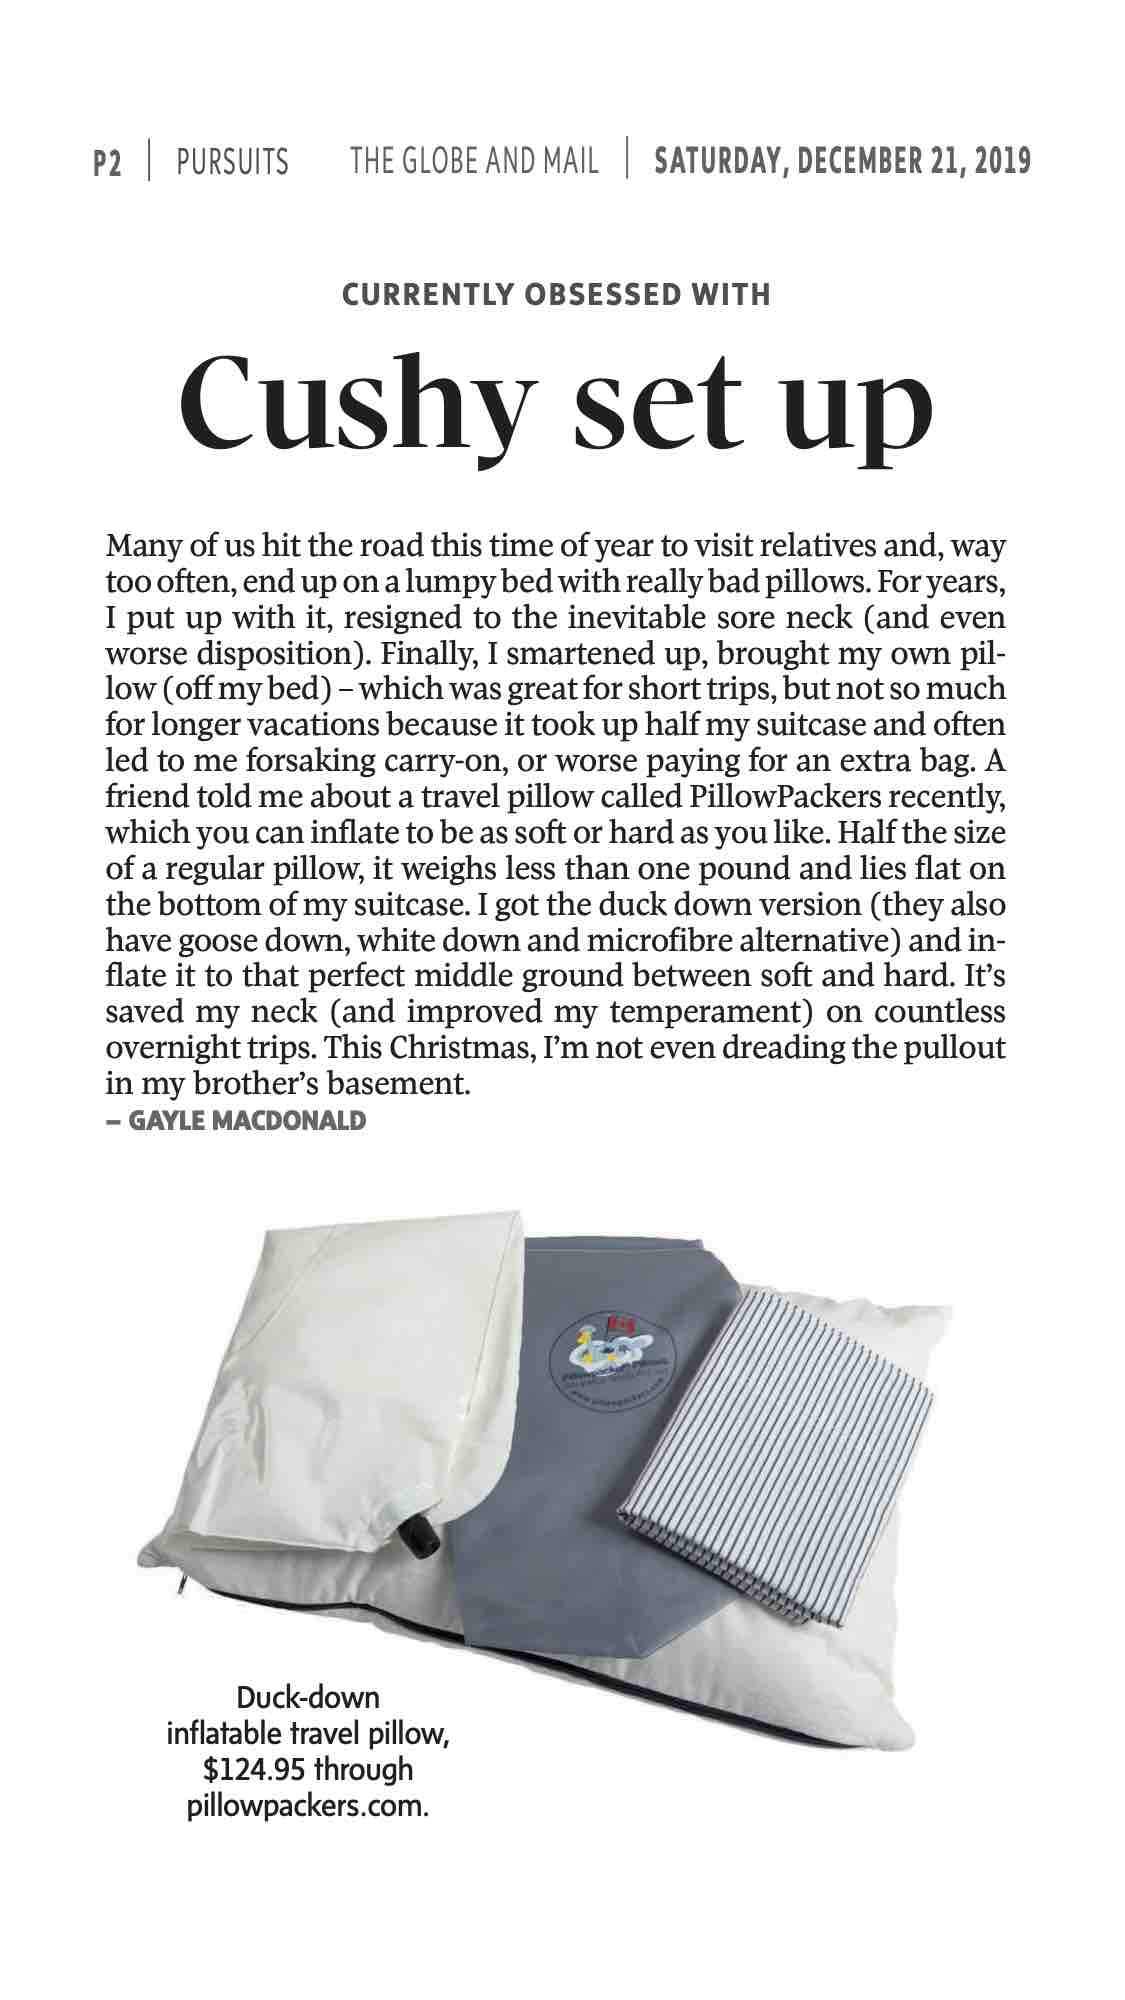 A Pillowpacker pillow featured in the Globe and Mail